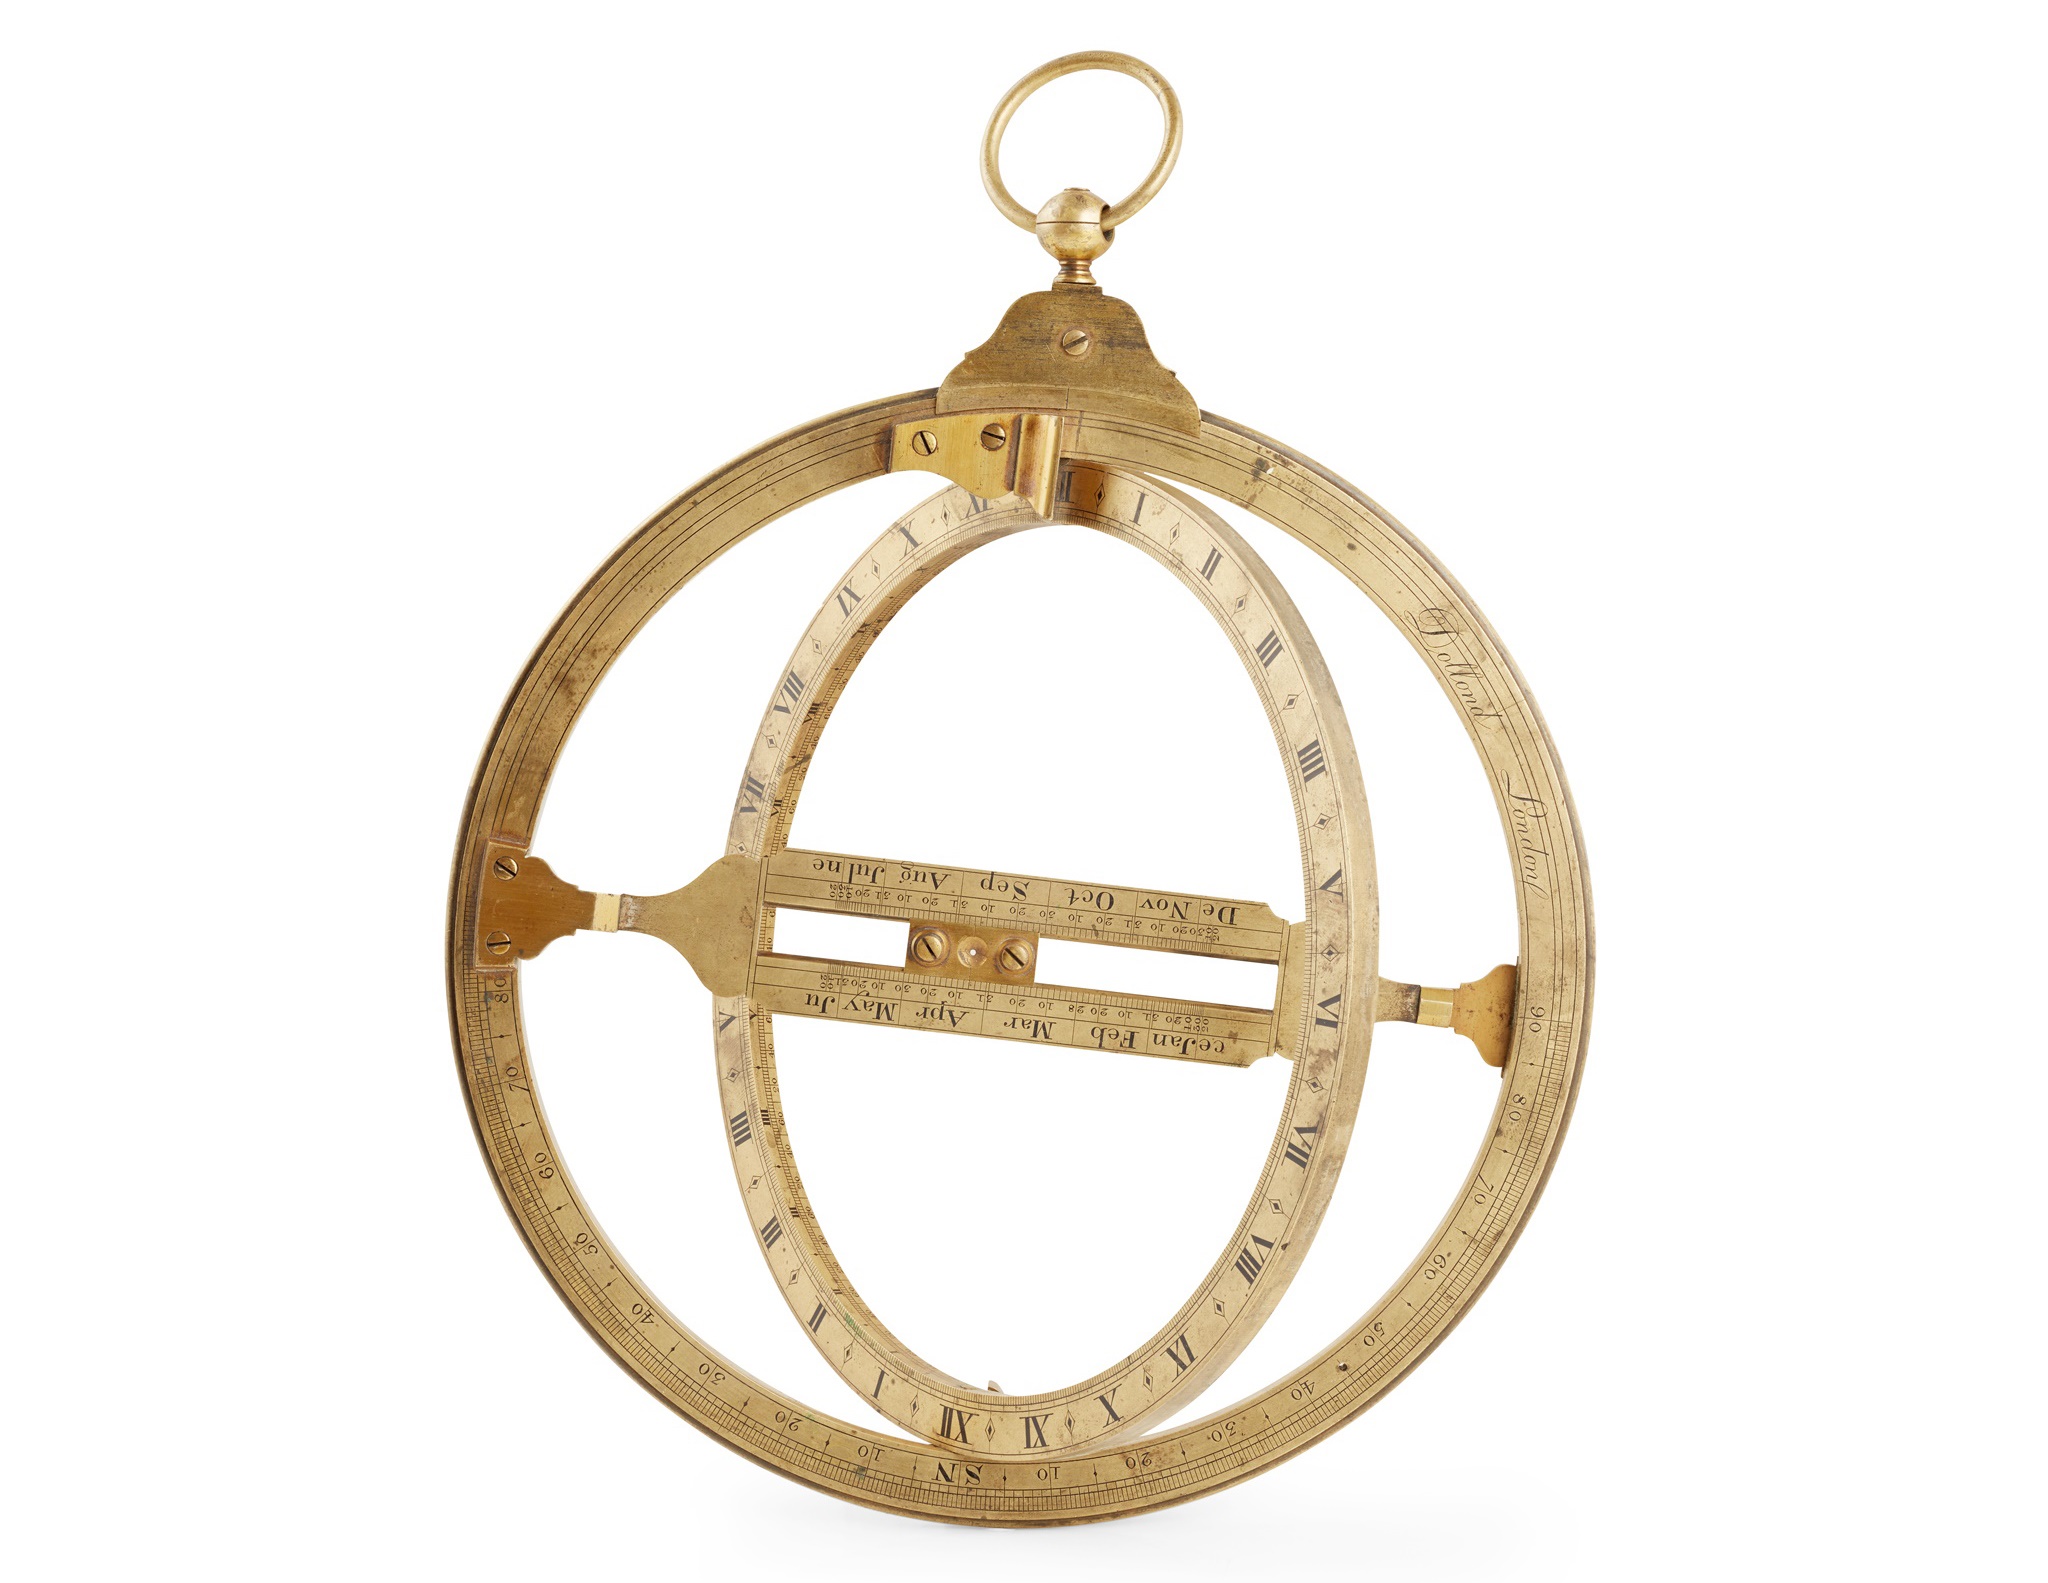 UNIVERSAL EQUINOCTIAL RING DIAL, DOLLOND, LONDON LATE 18TH / EARLY 19TH CENTURY